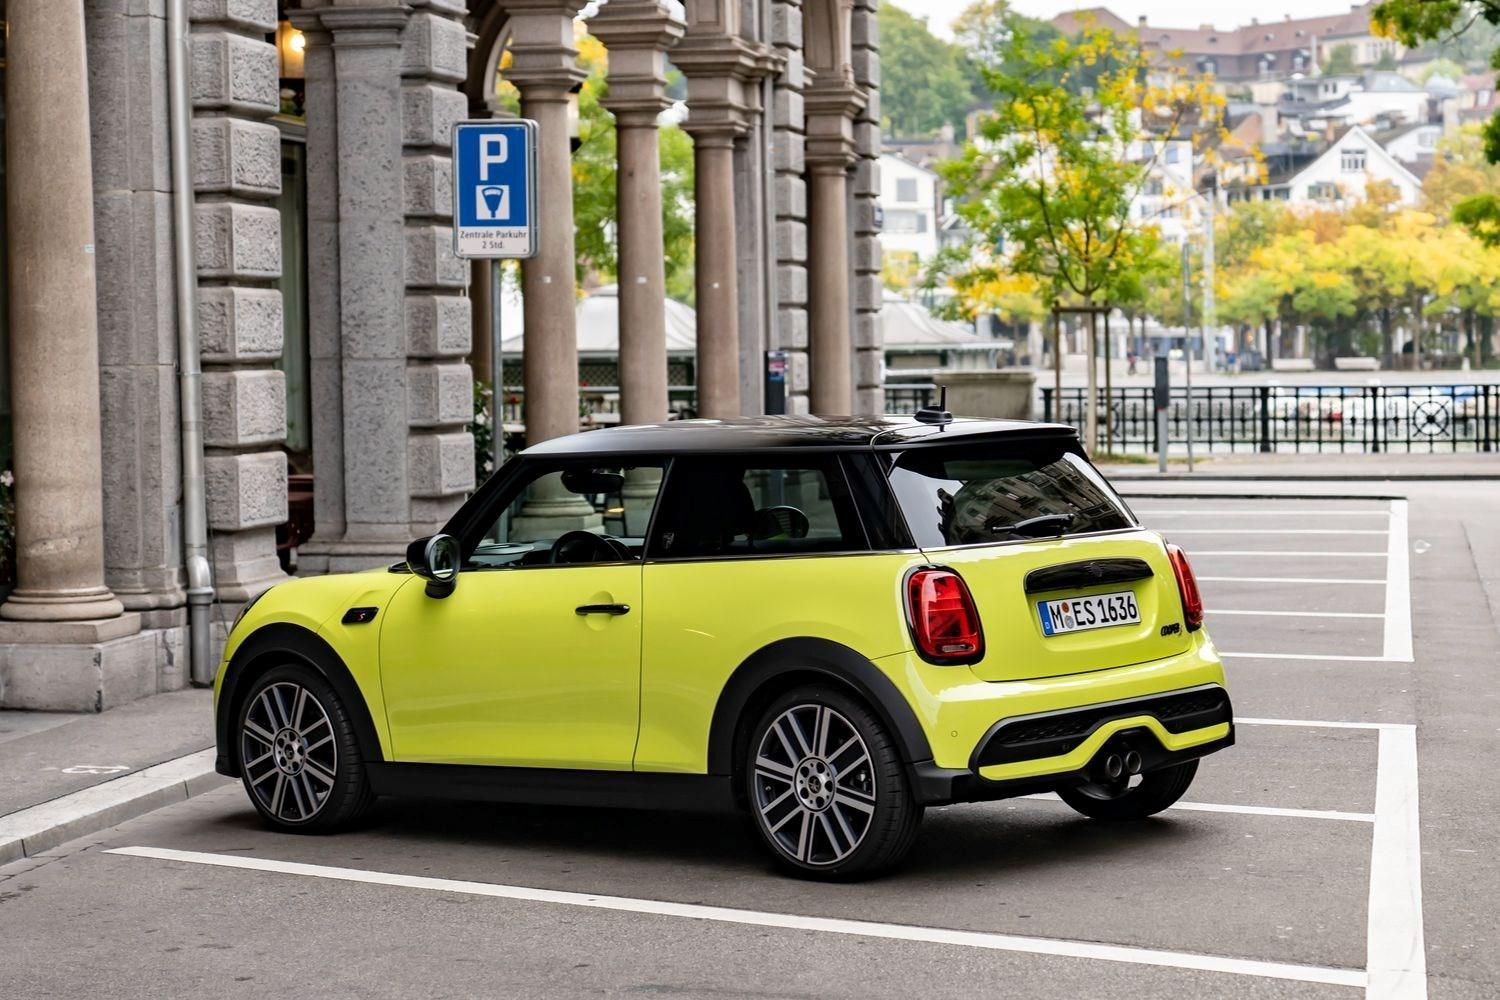 Side view of the new MINI 3-Door Hatchback in yellow, parked in car park space next to old building in European city